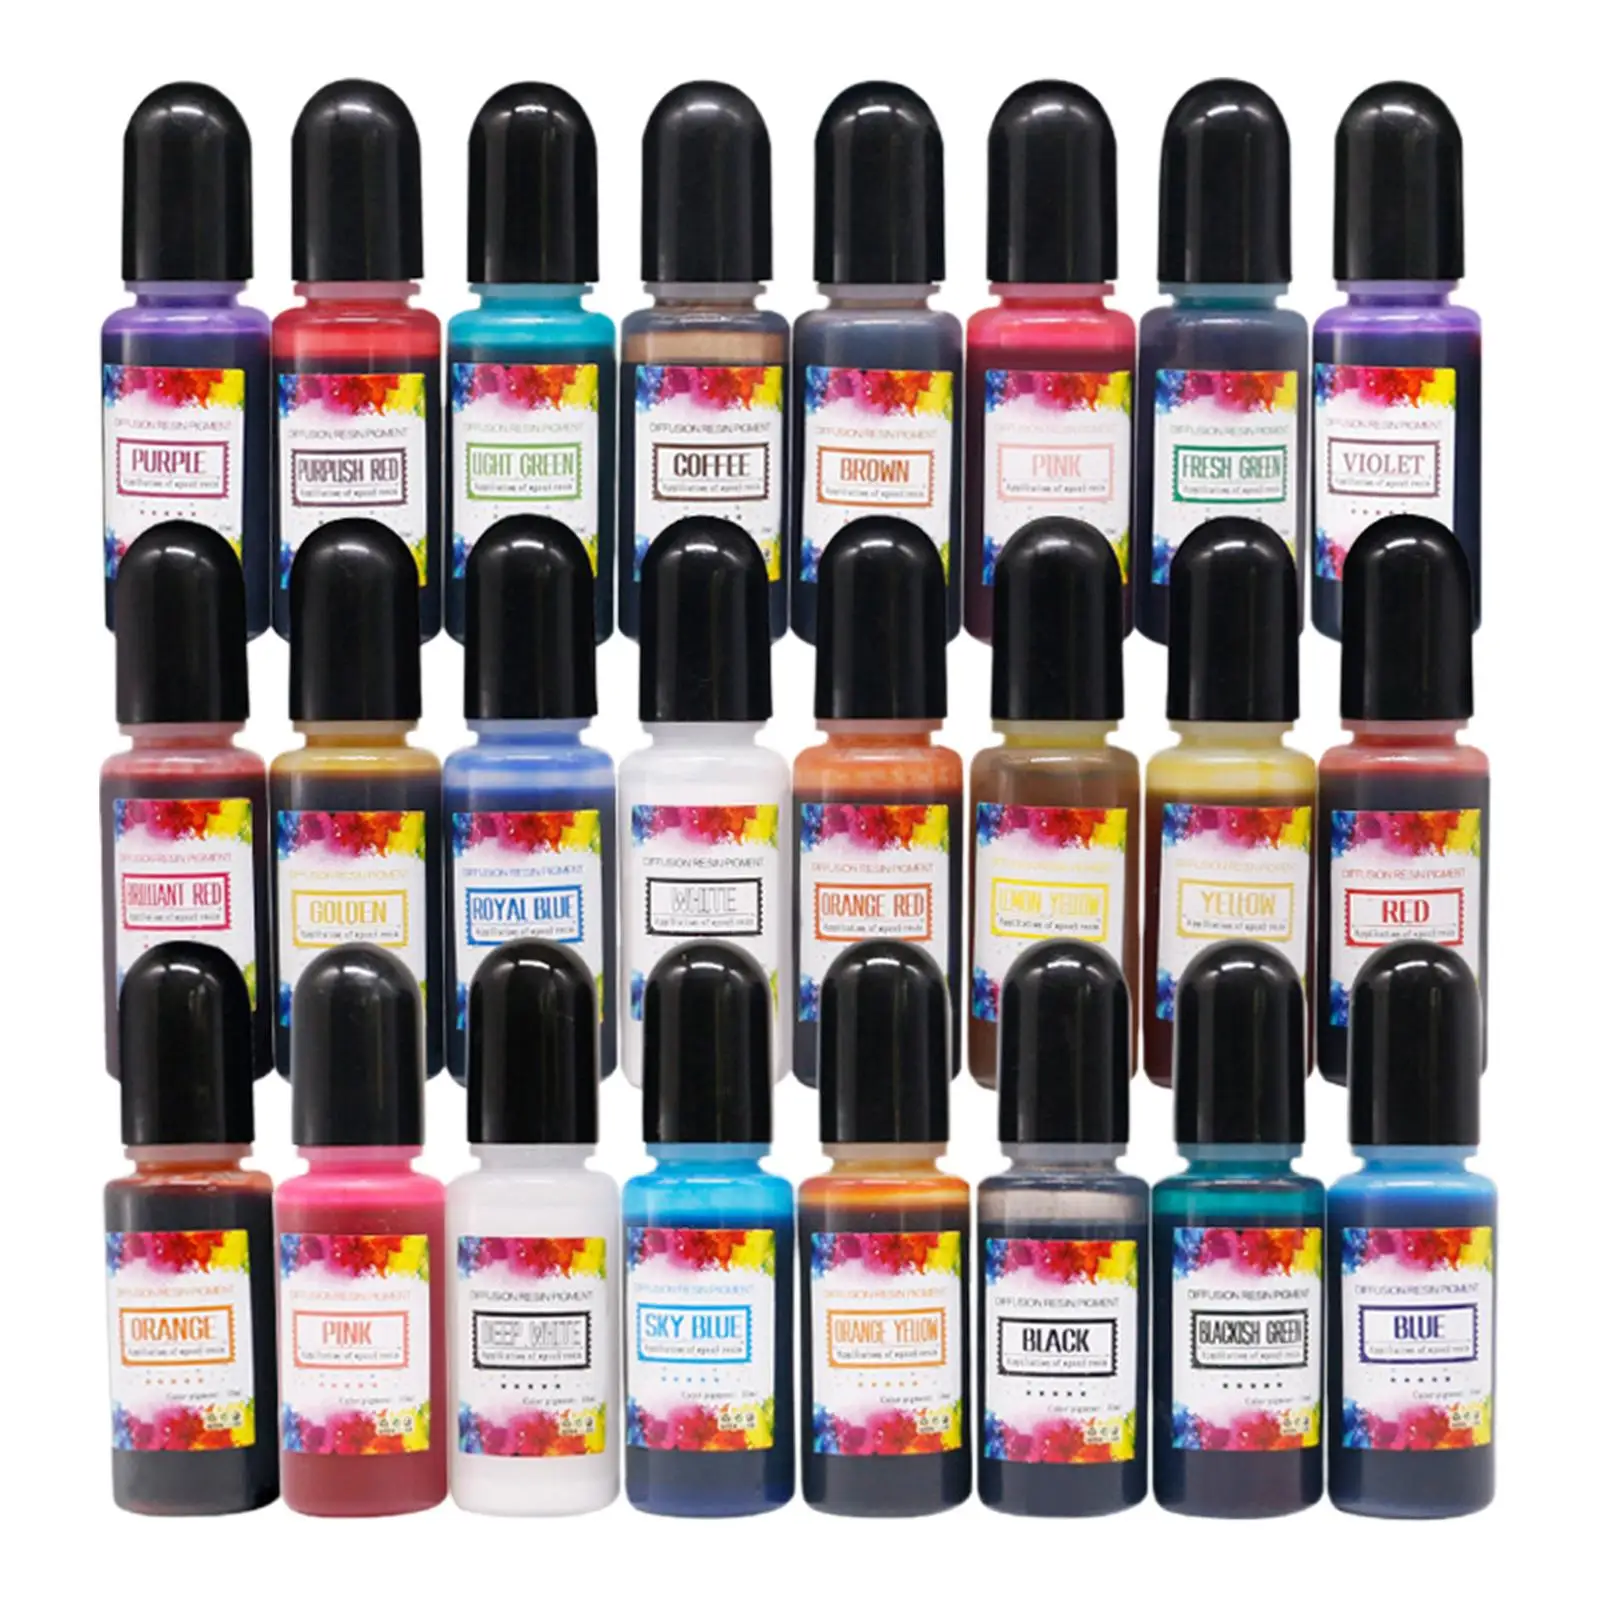 24x Vibrant Inks Epoxy Resin Pigment Resin Coloring Liquid Dye Concentrate 10ml for Acrylic Painting Drawing DIY Craft Scrapbook